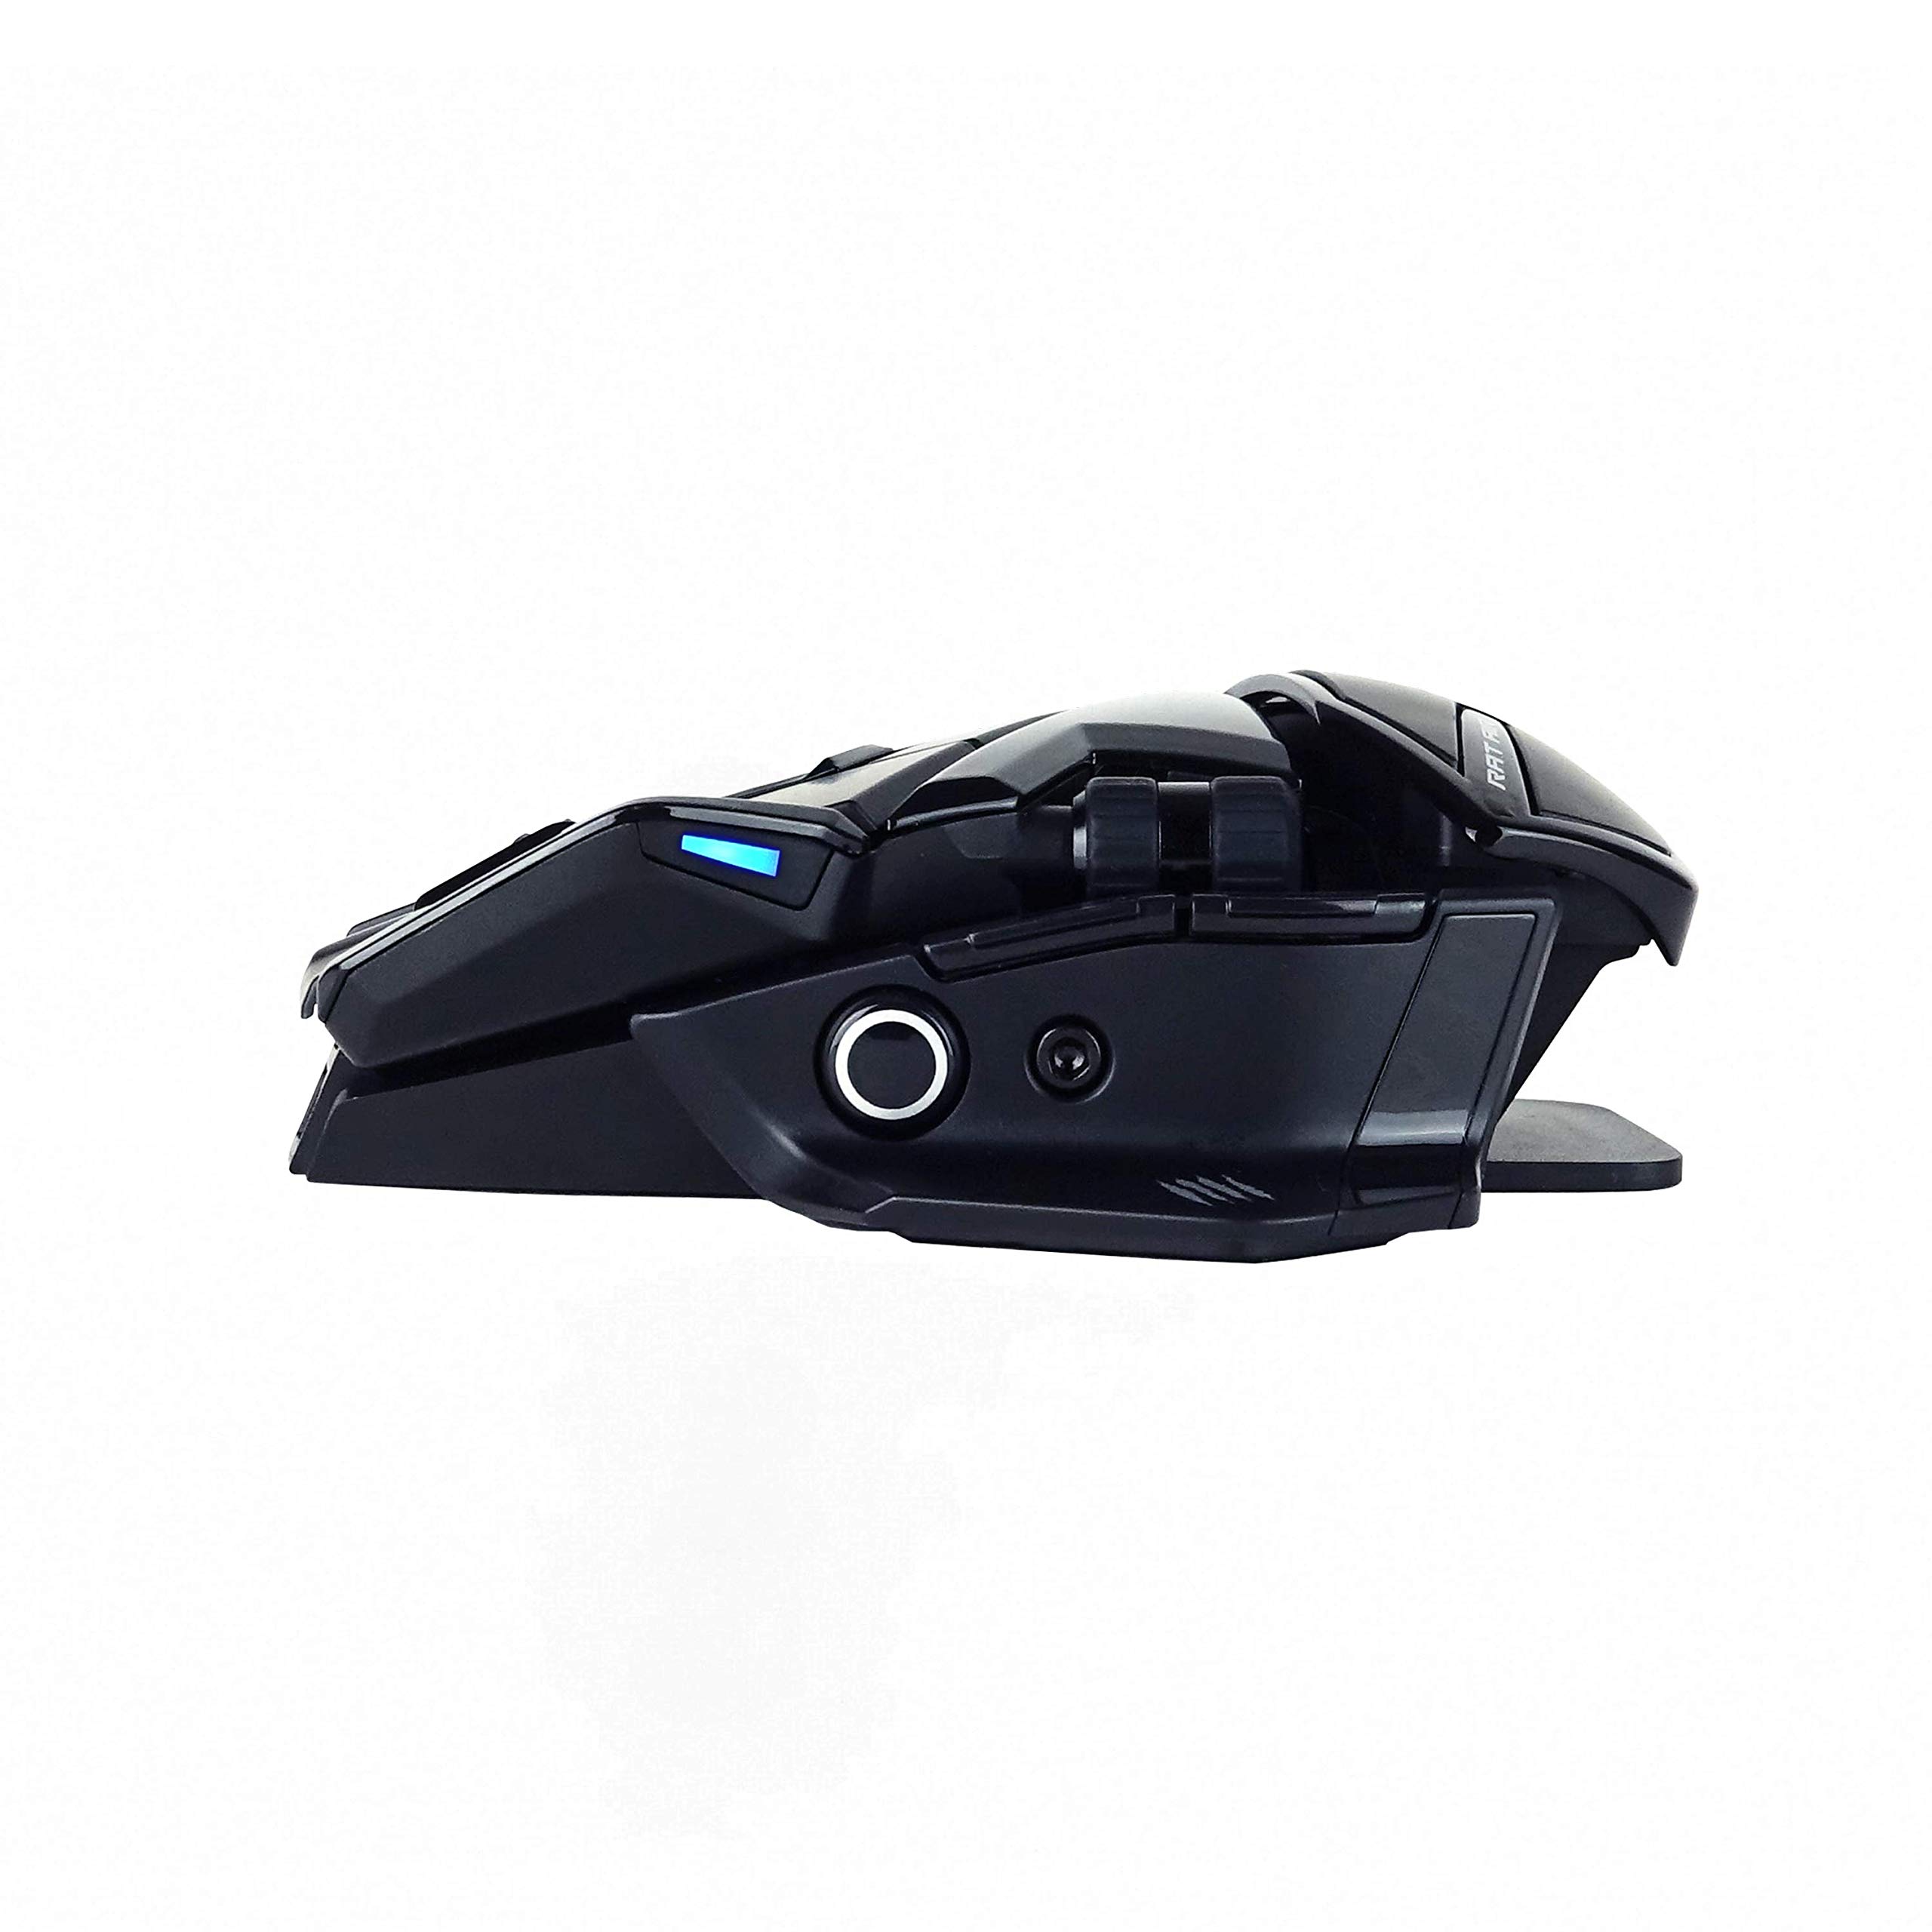 Mad Catz The Authentic R.A.T. AIR Wireless Power Gaming Mouse with Charging Pad - Black